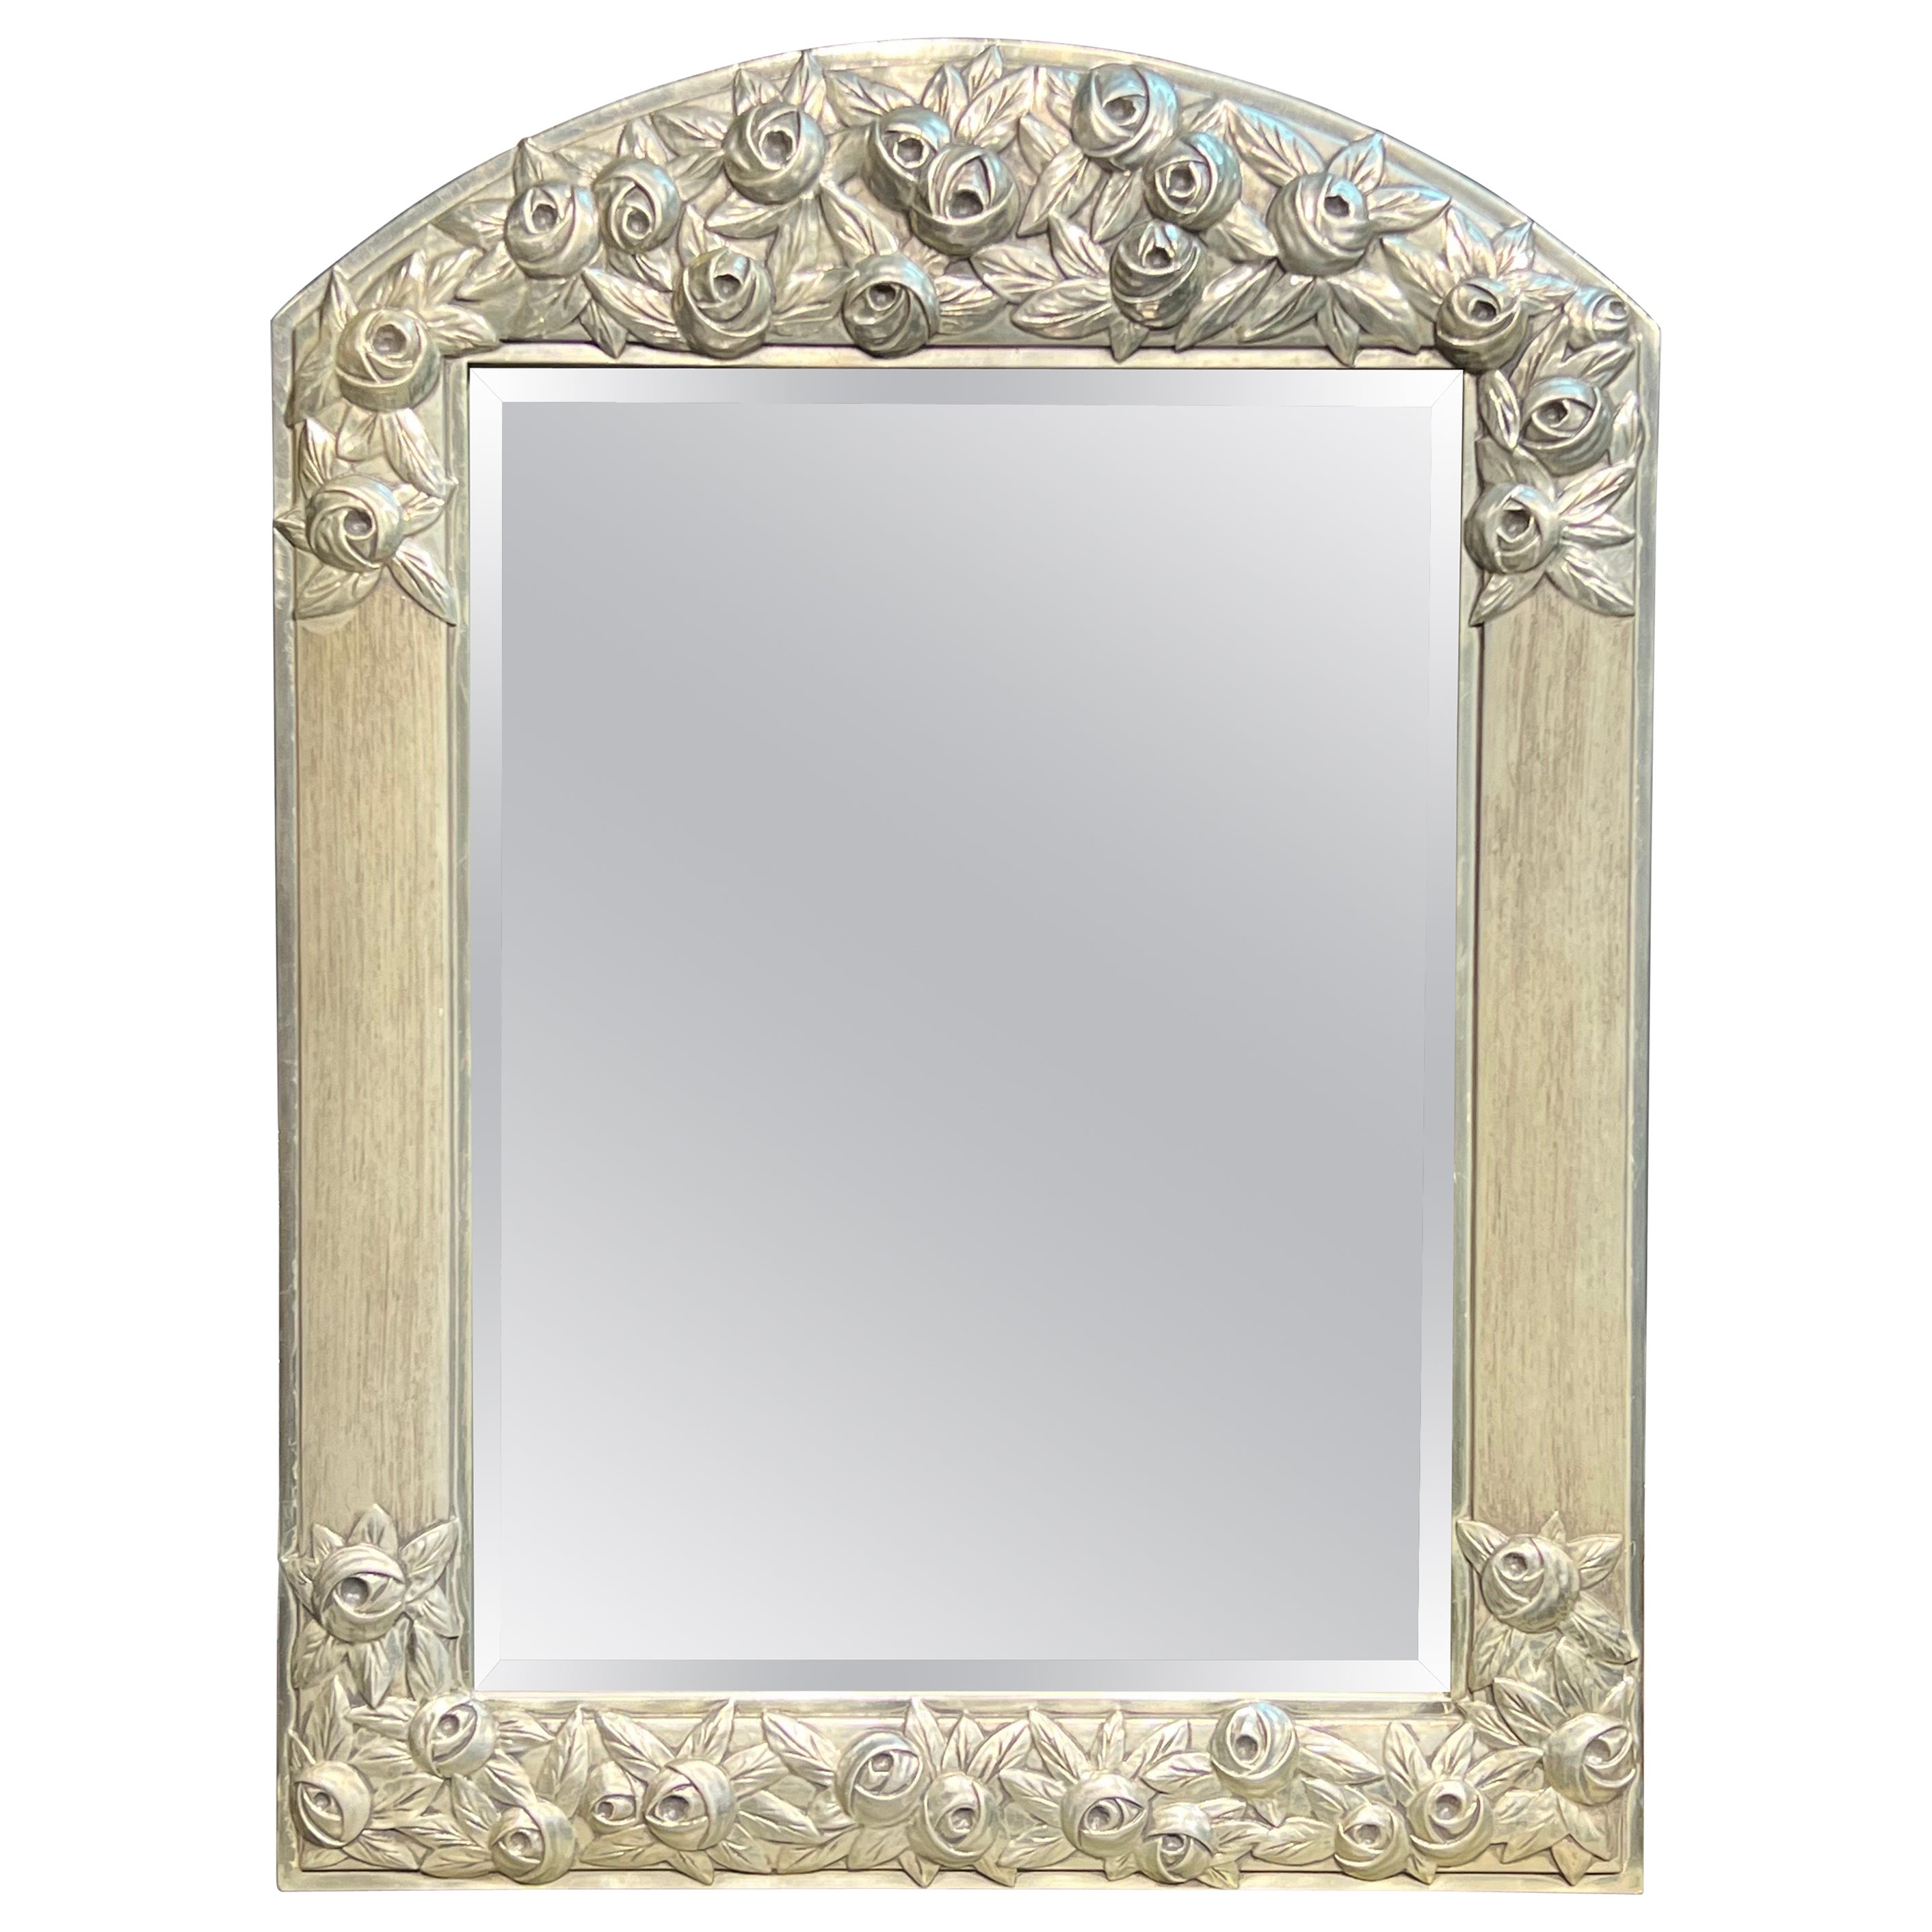 20th Century French Art Deco Hand Carved Wooden Mirror in Silver Finished Frame